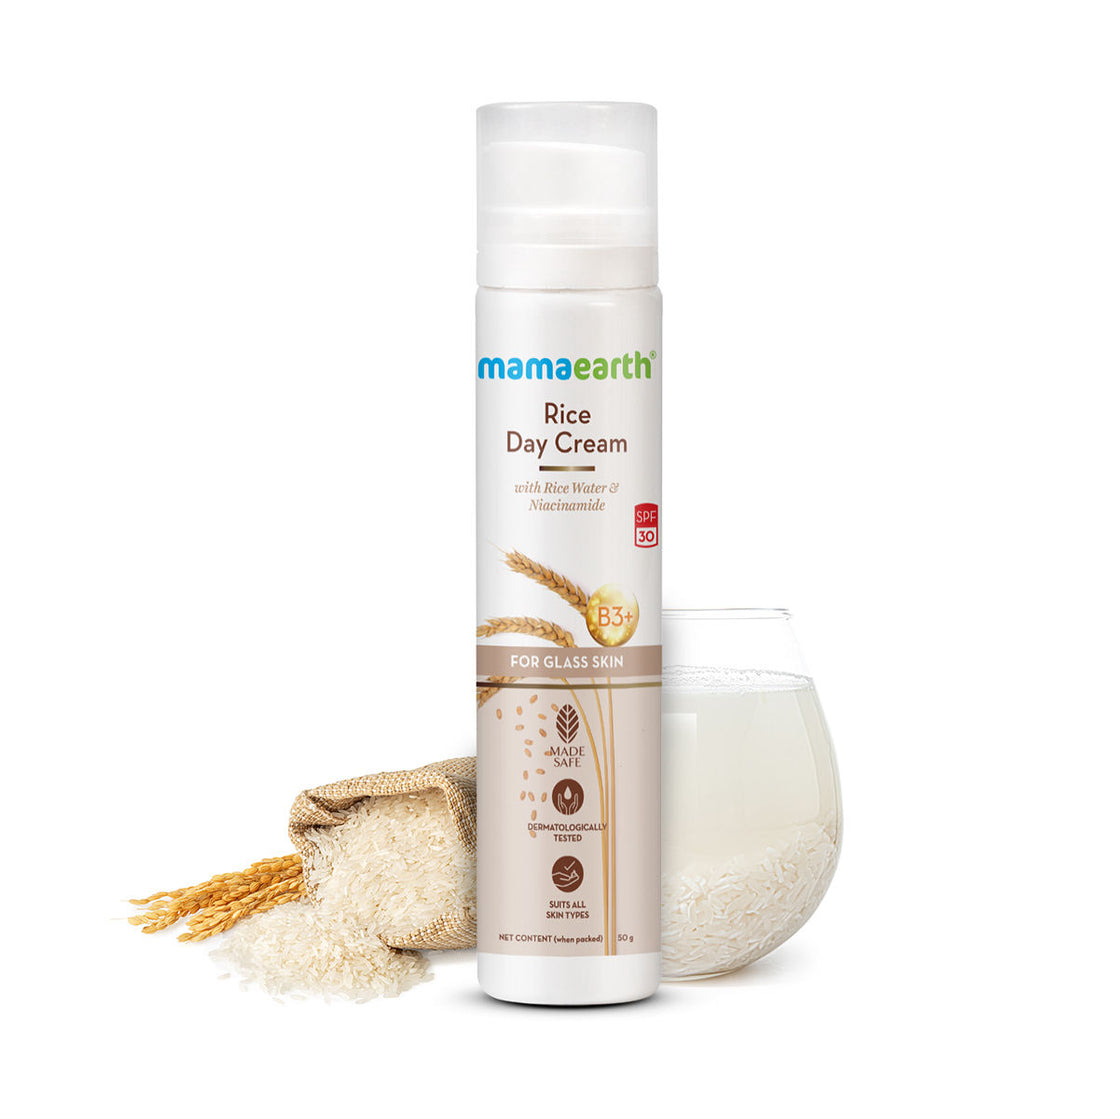 Mamaearth Rice Day Cream For Daily Use With Rice Water & Niacinamide For Glass Skin